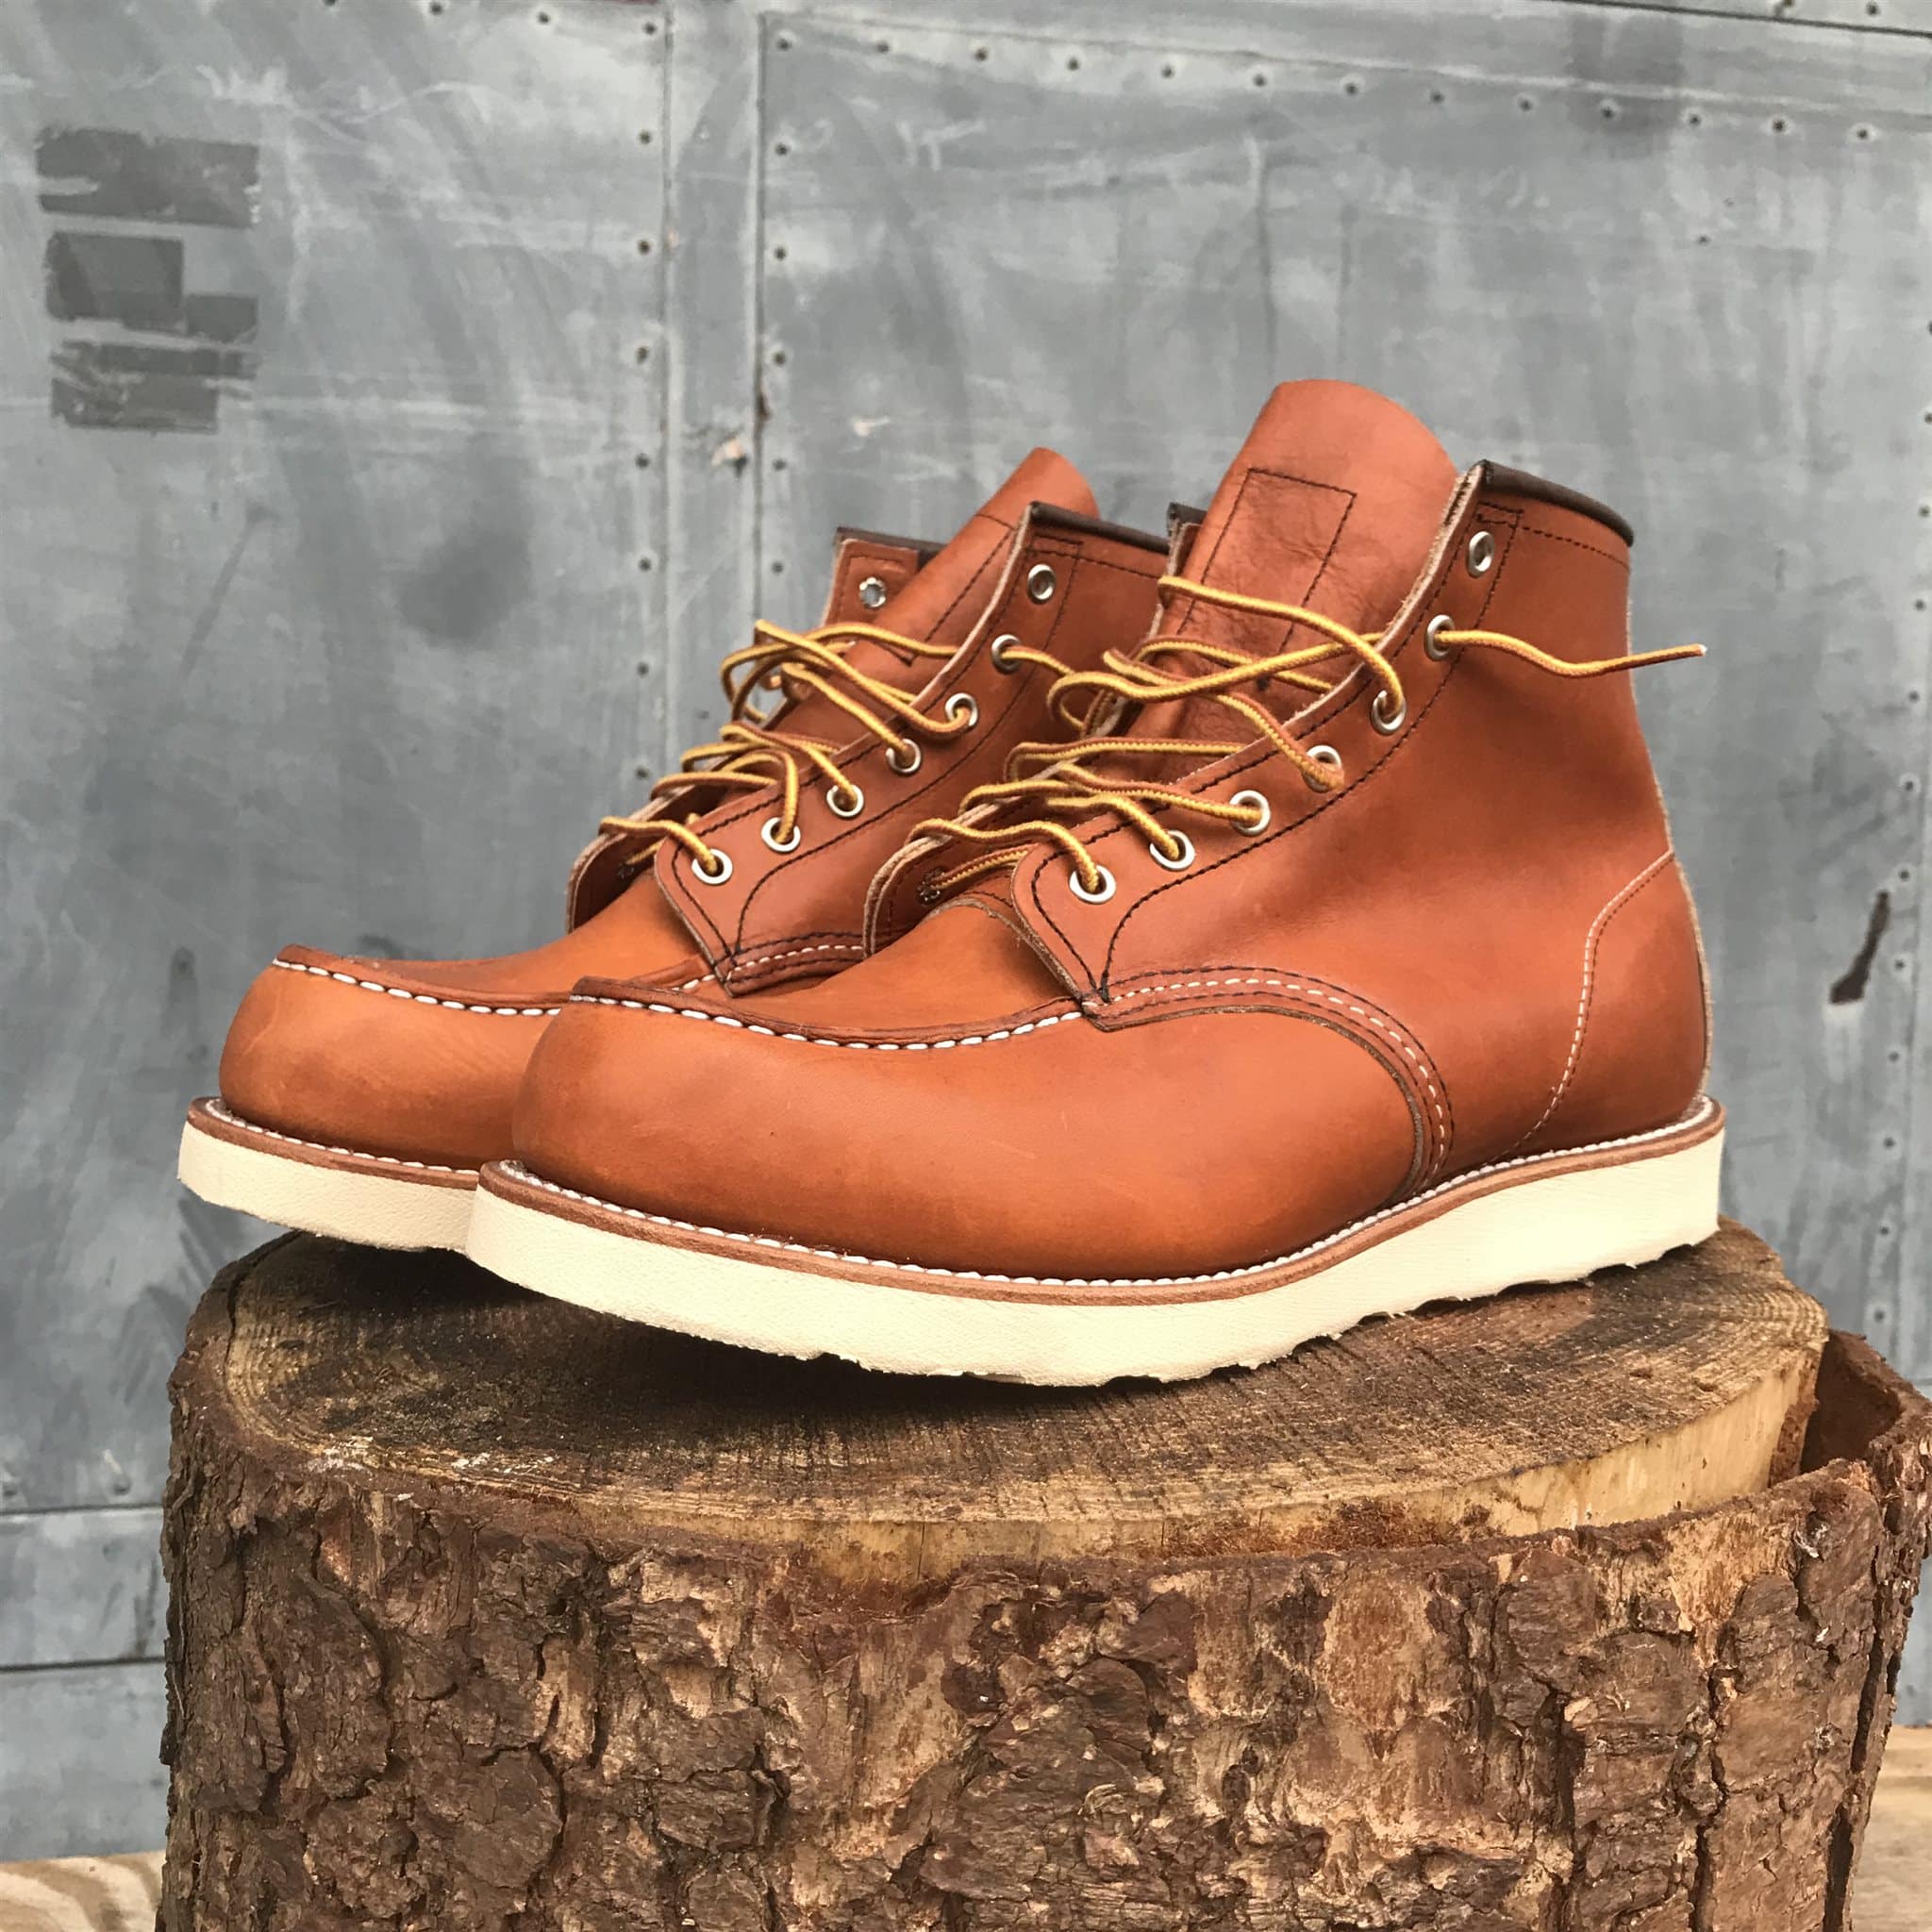 Red wing 875